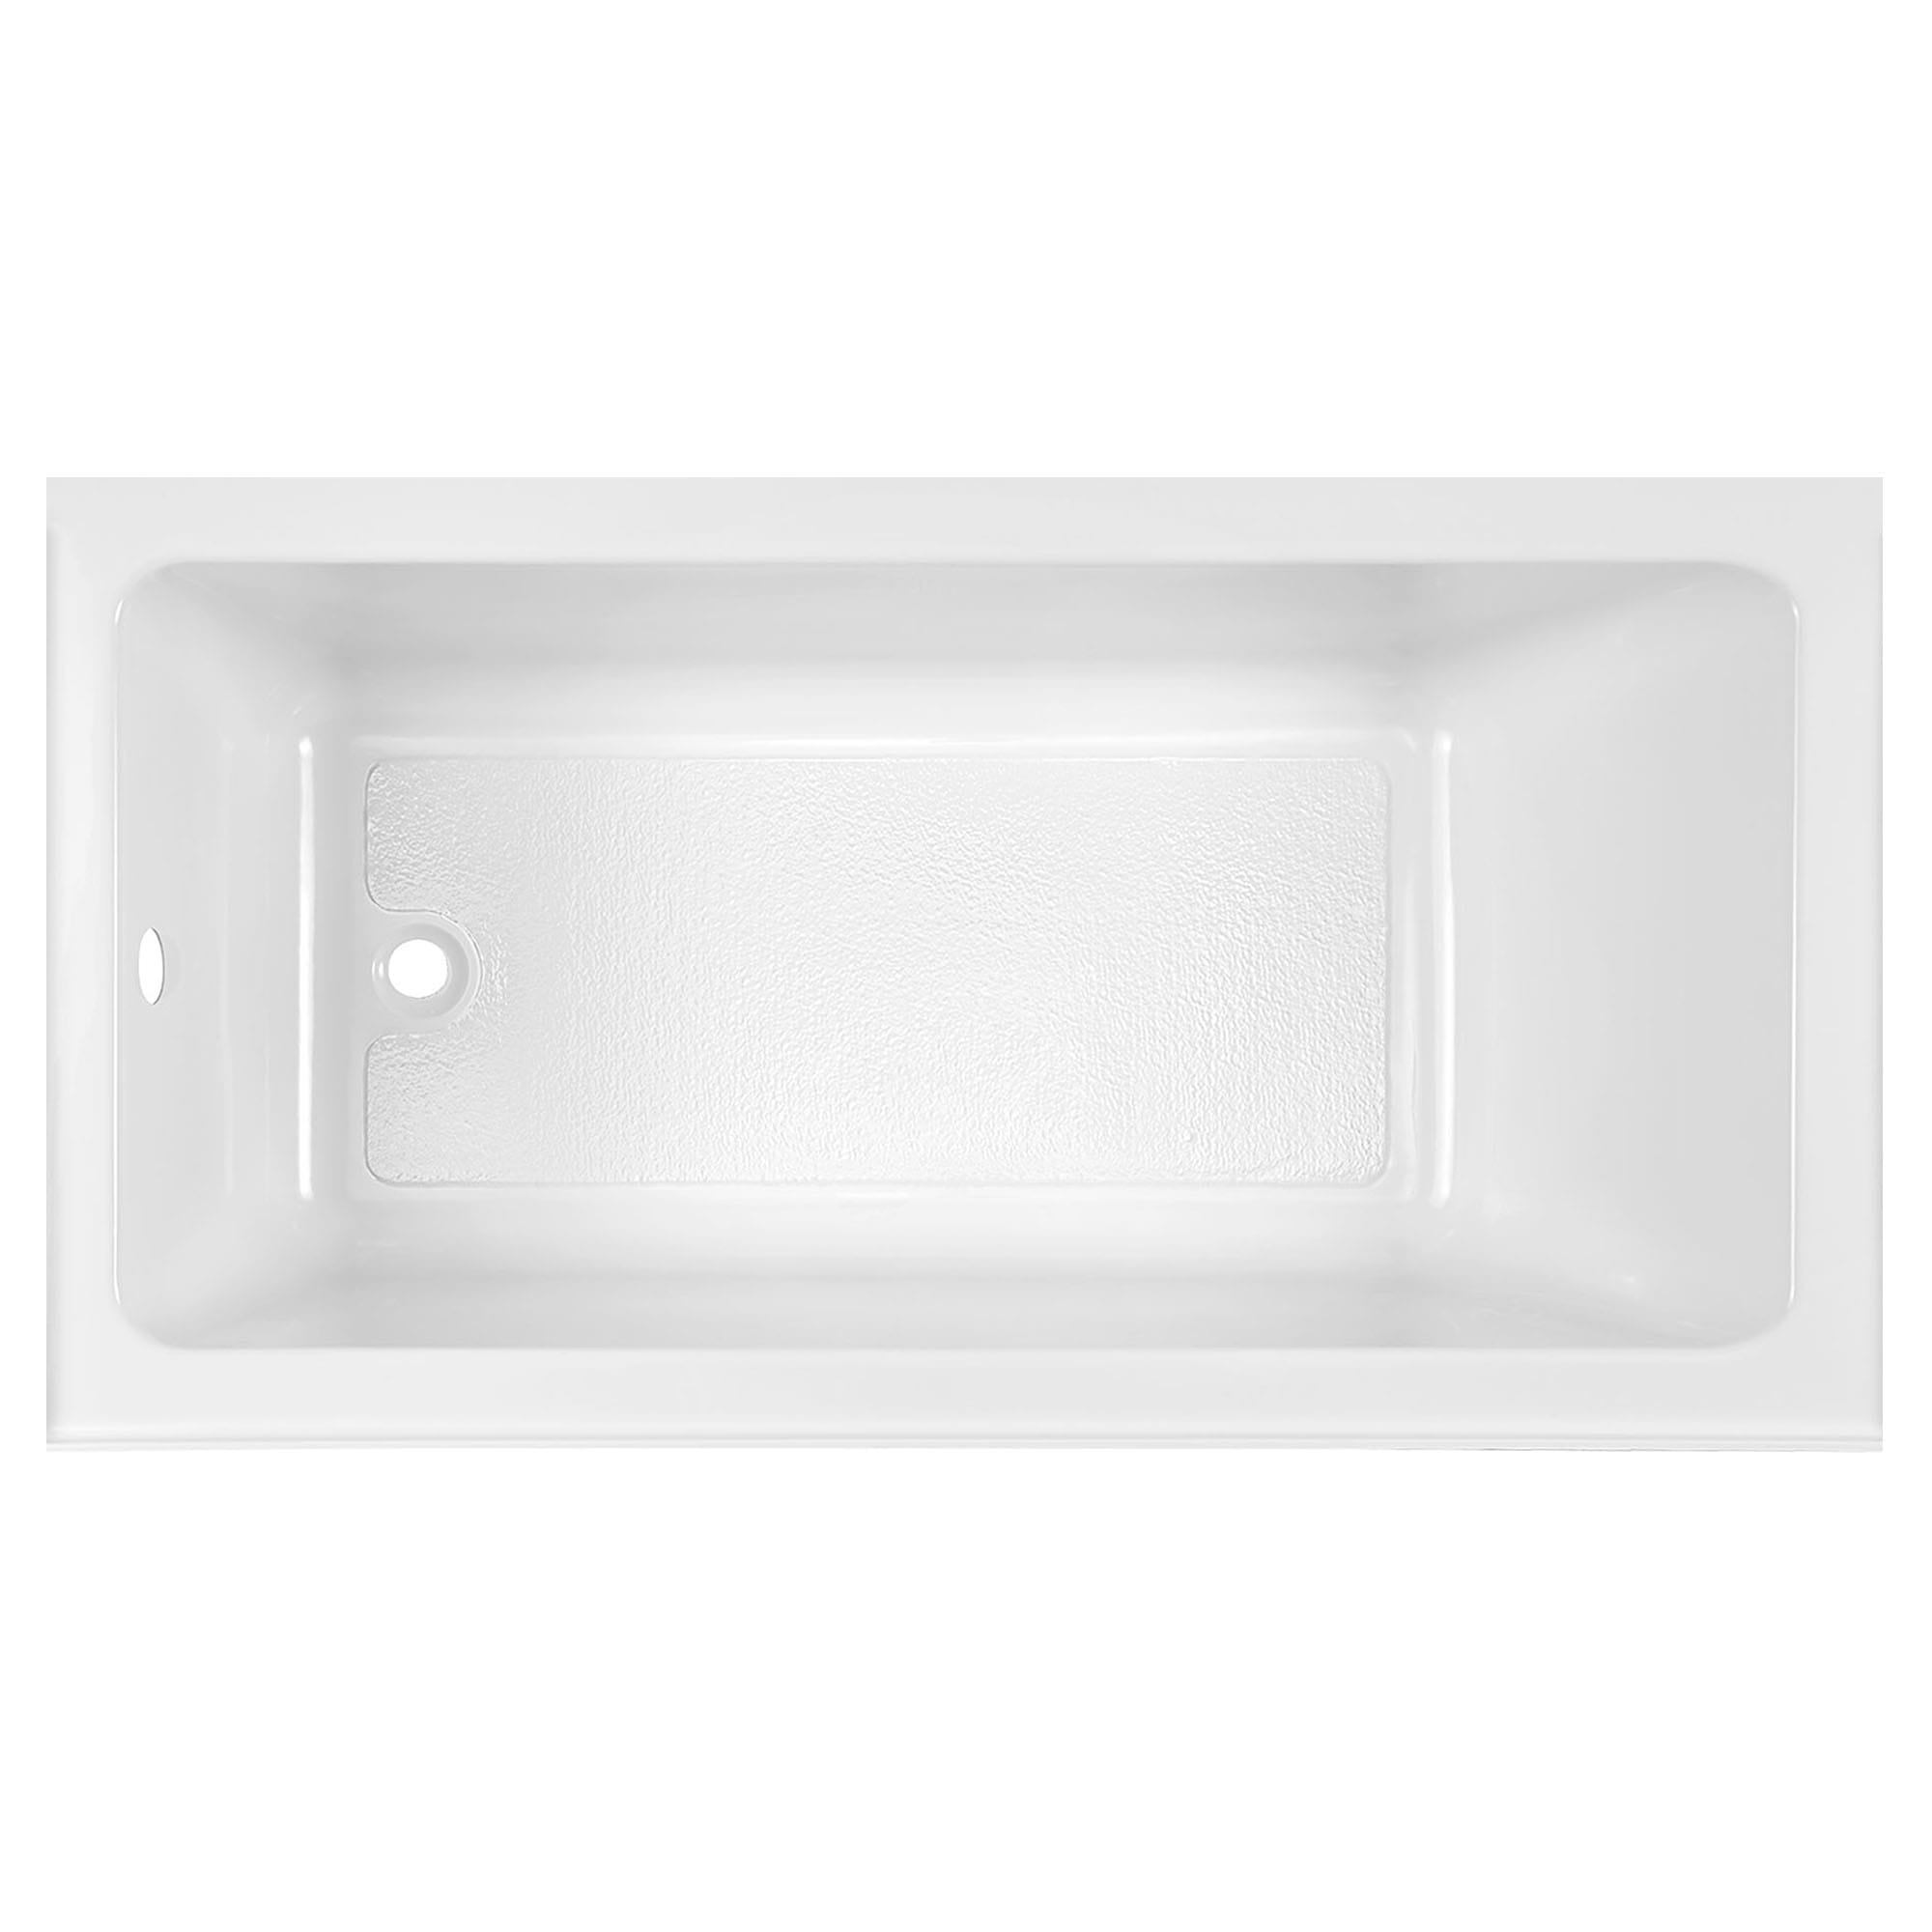 Studio® 60 x 30-Inch Integral Apron Bathtub Above Floor Rough With Left-Hand Outlet